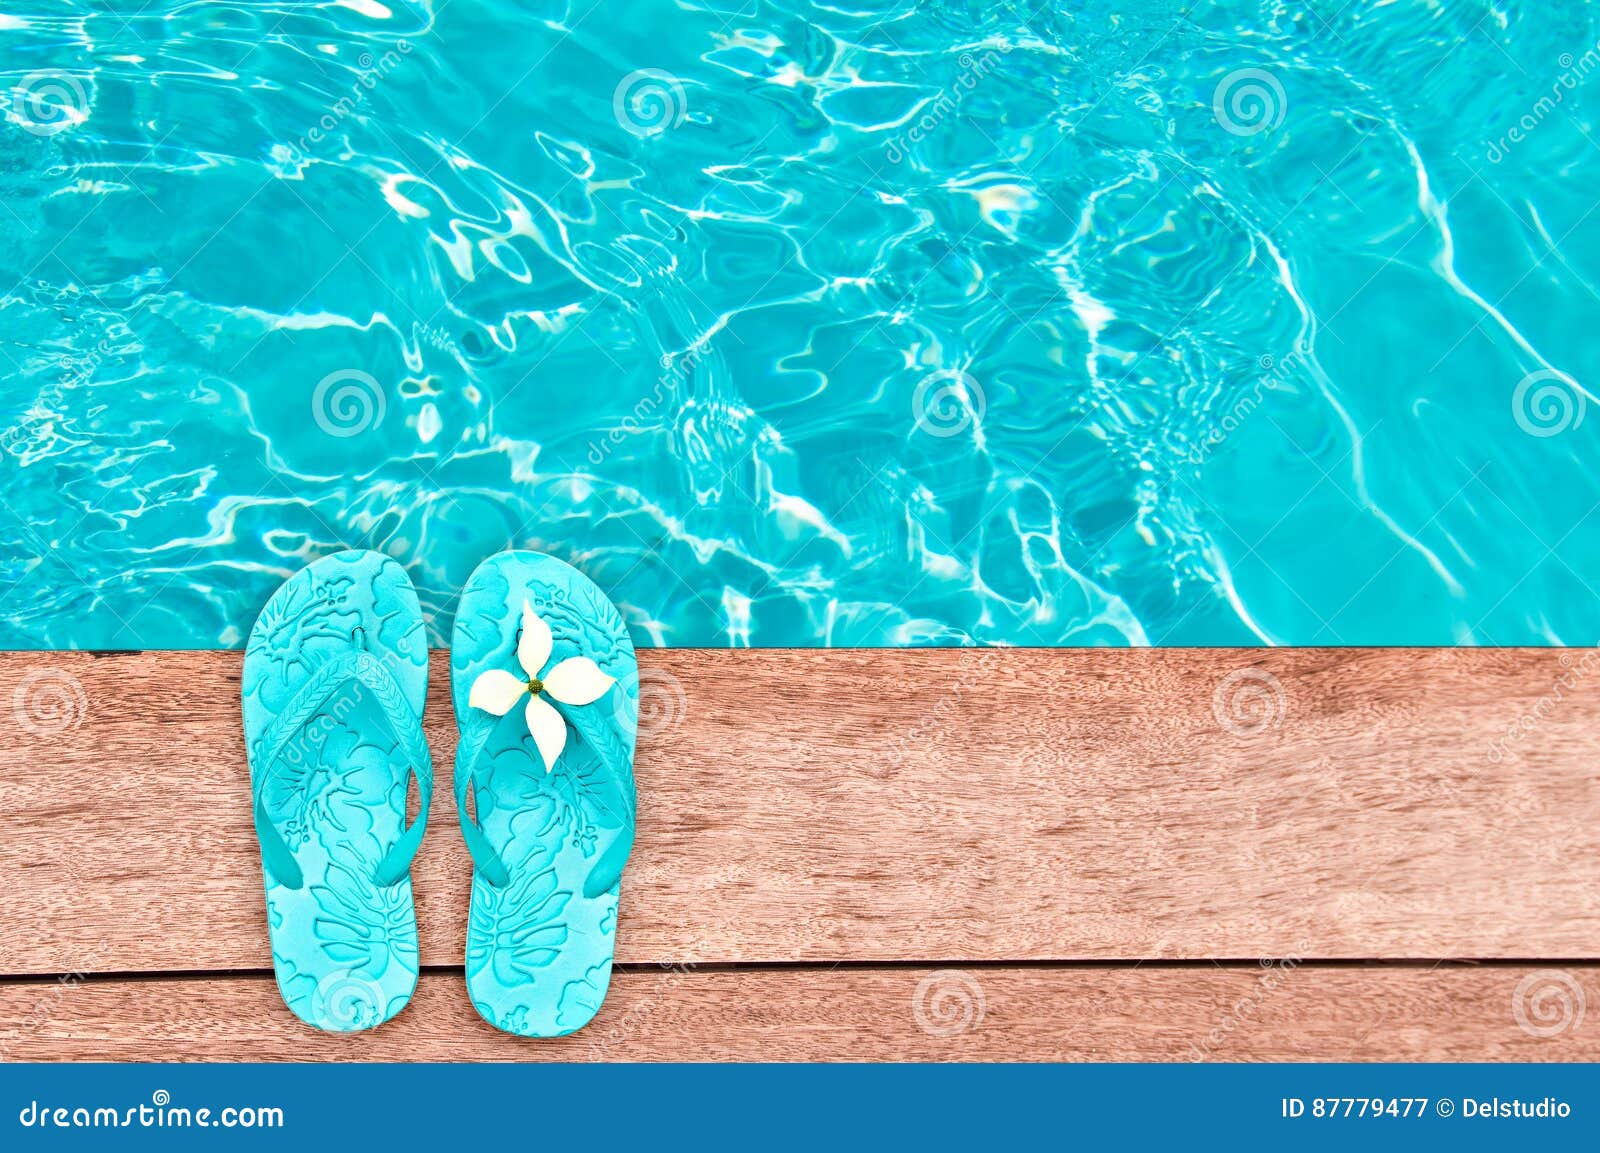 Swimming Pool, Summer Concept 